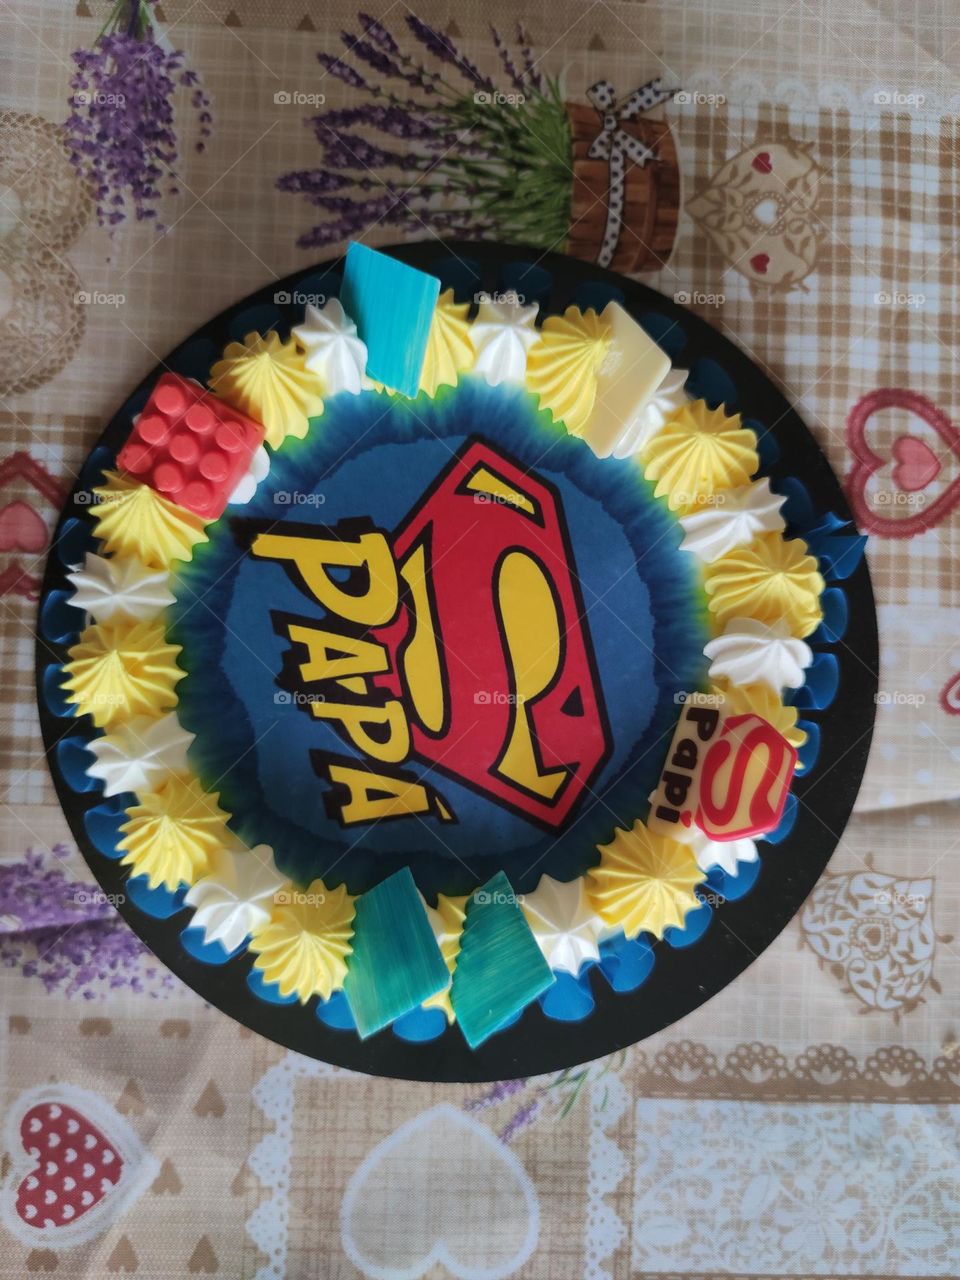 father's day cake